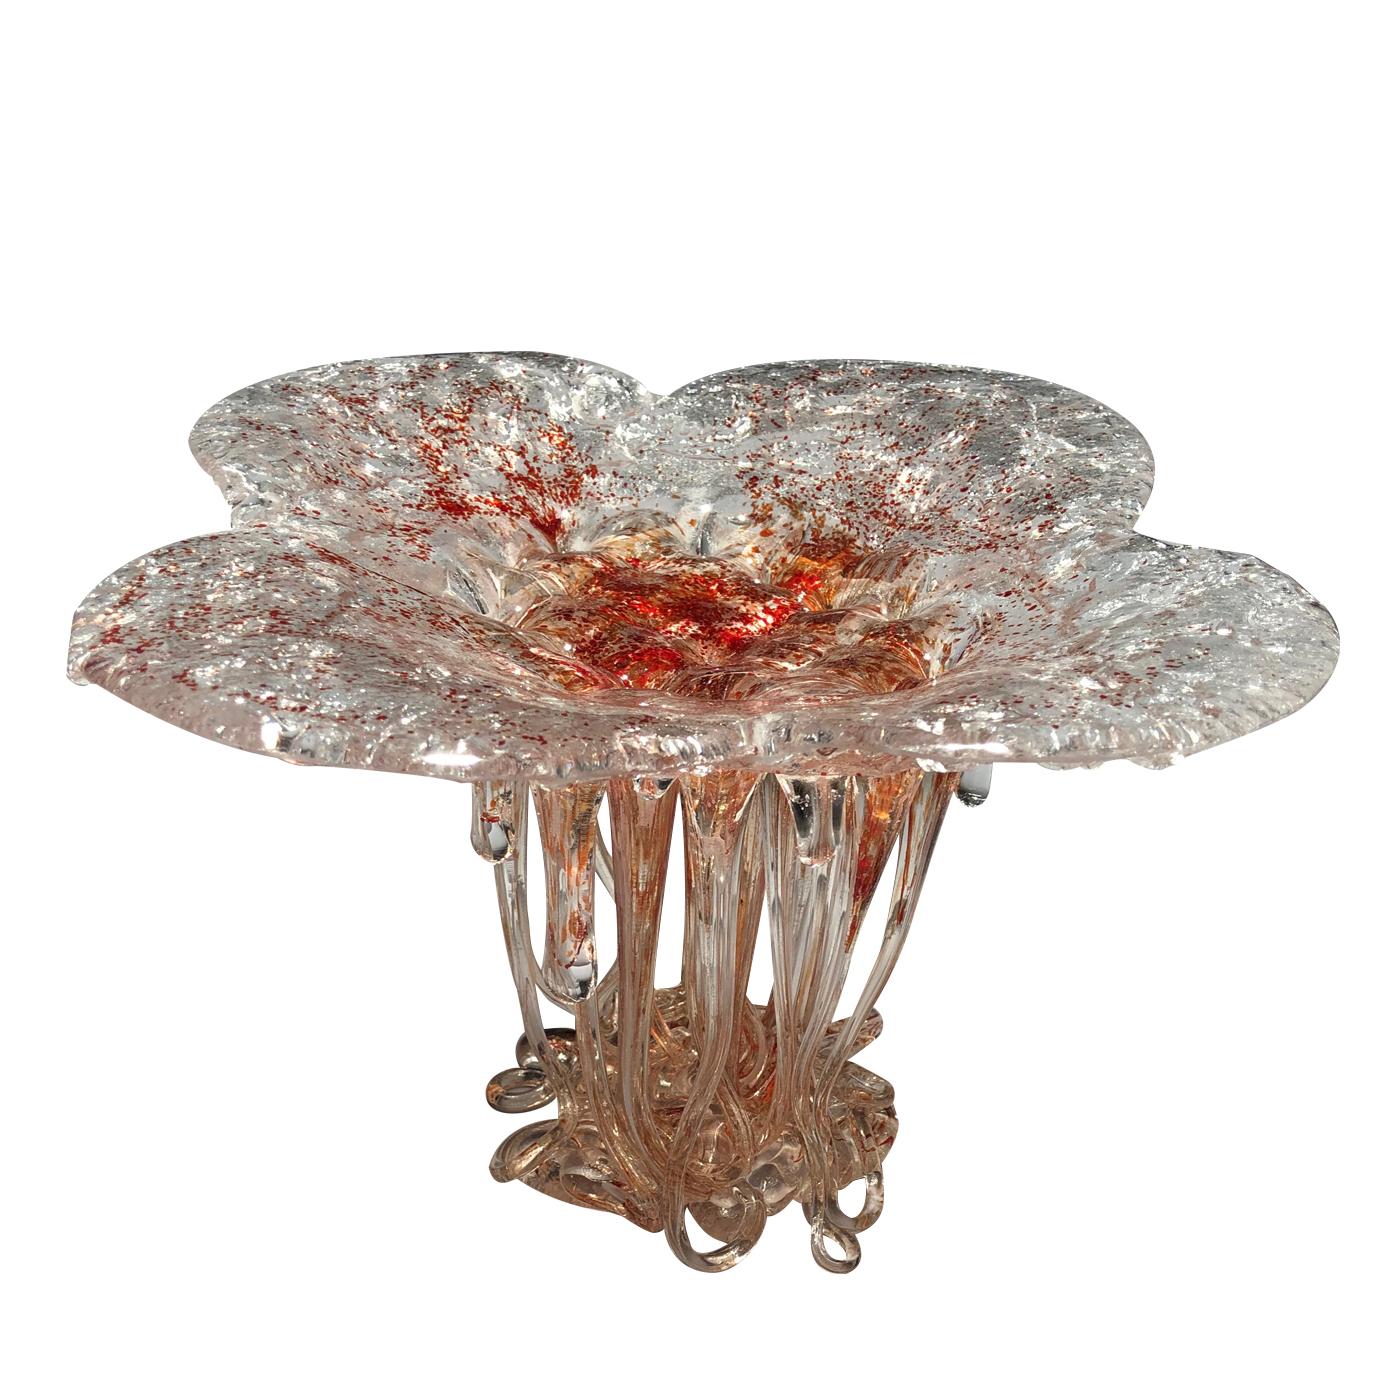 This unique and striking Murano glass sculpture in tones of pinks, reds and gold is a piece that is reminiscent of a sea creature or jellyfish with its flowing, flower-shaped top and dripping tentacles underneath. This gorgeous piece will be sure to